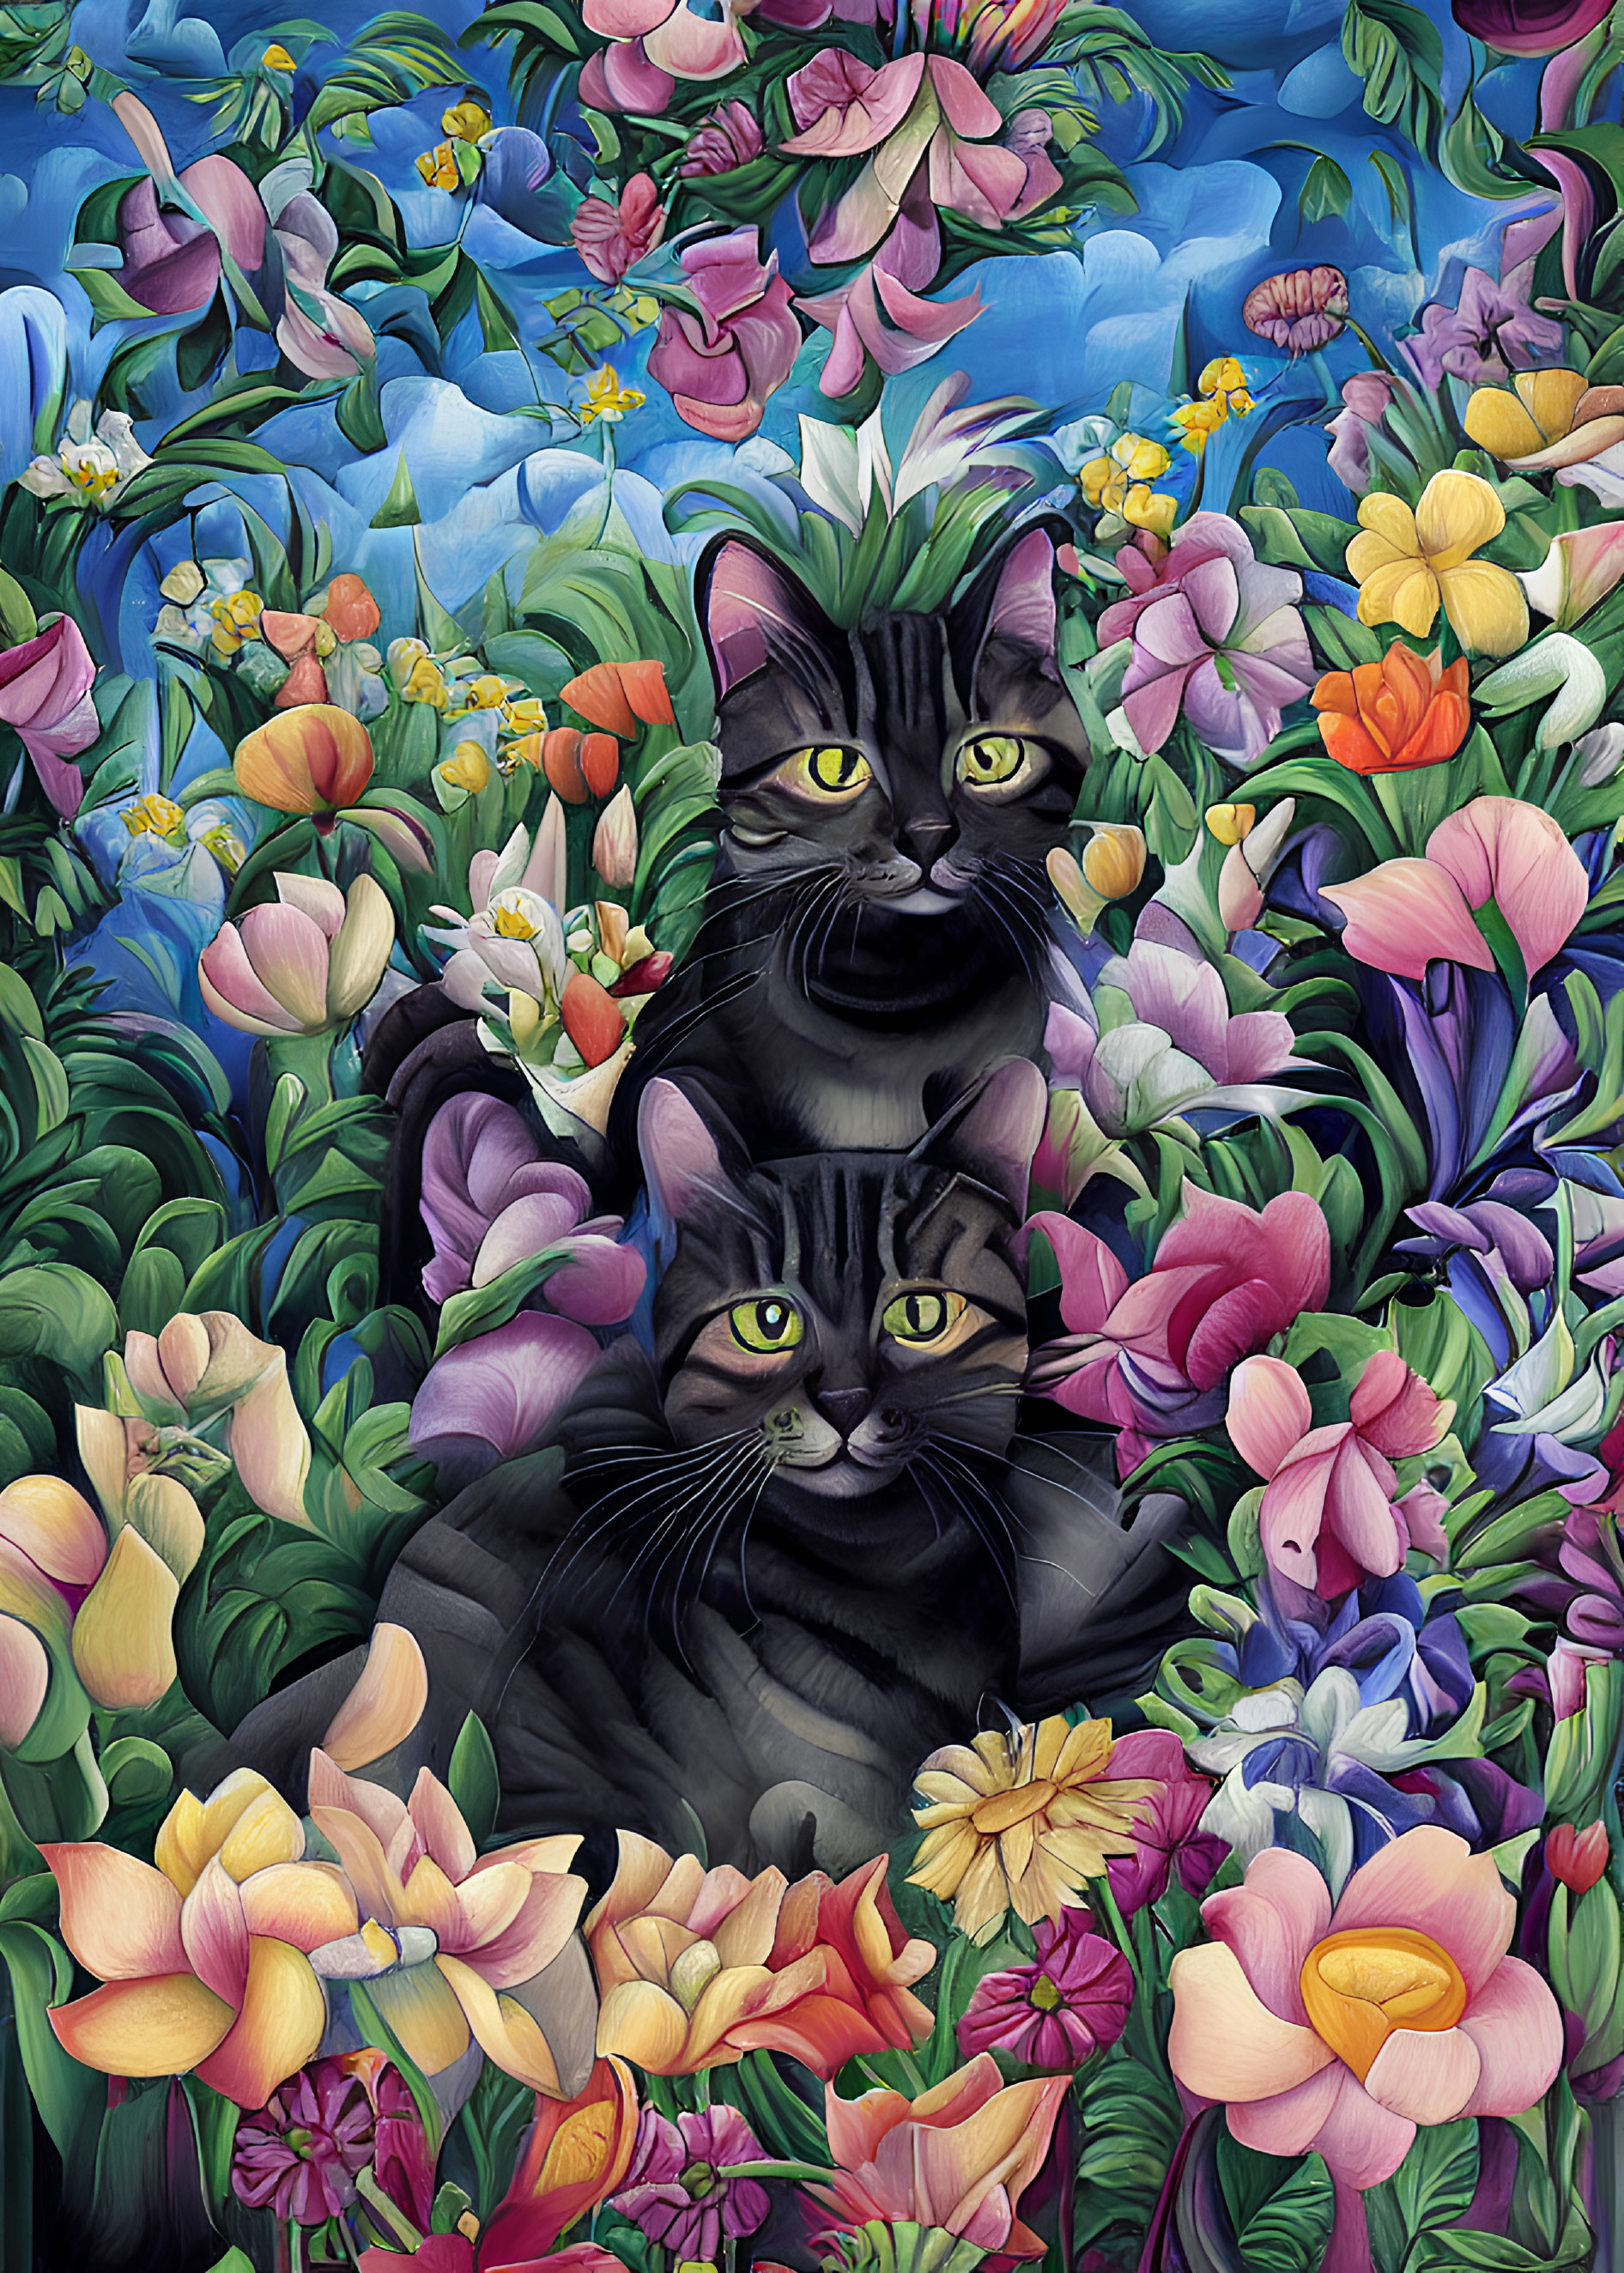 Two Black Cats Surrounded by Colorful Flowers and Green Foliage